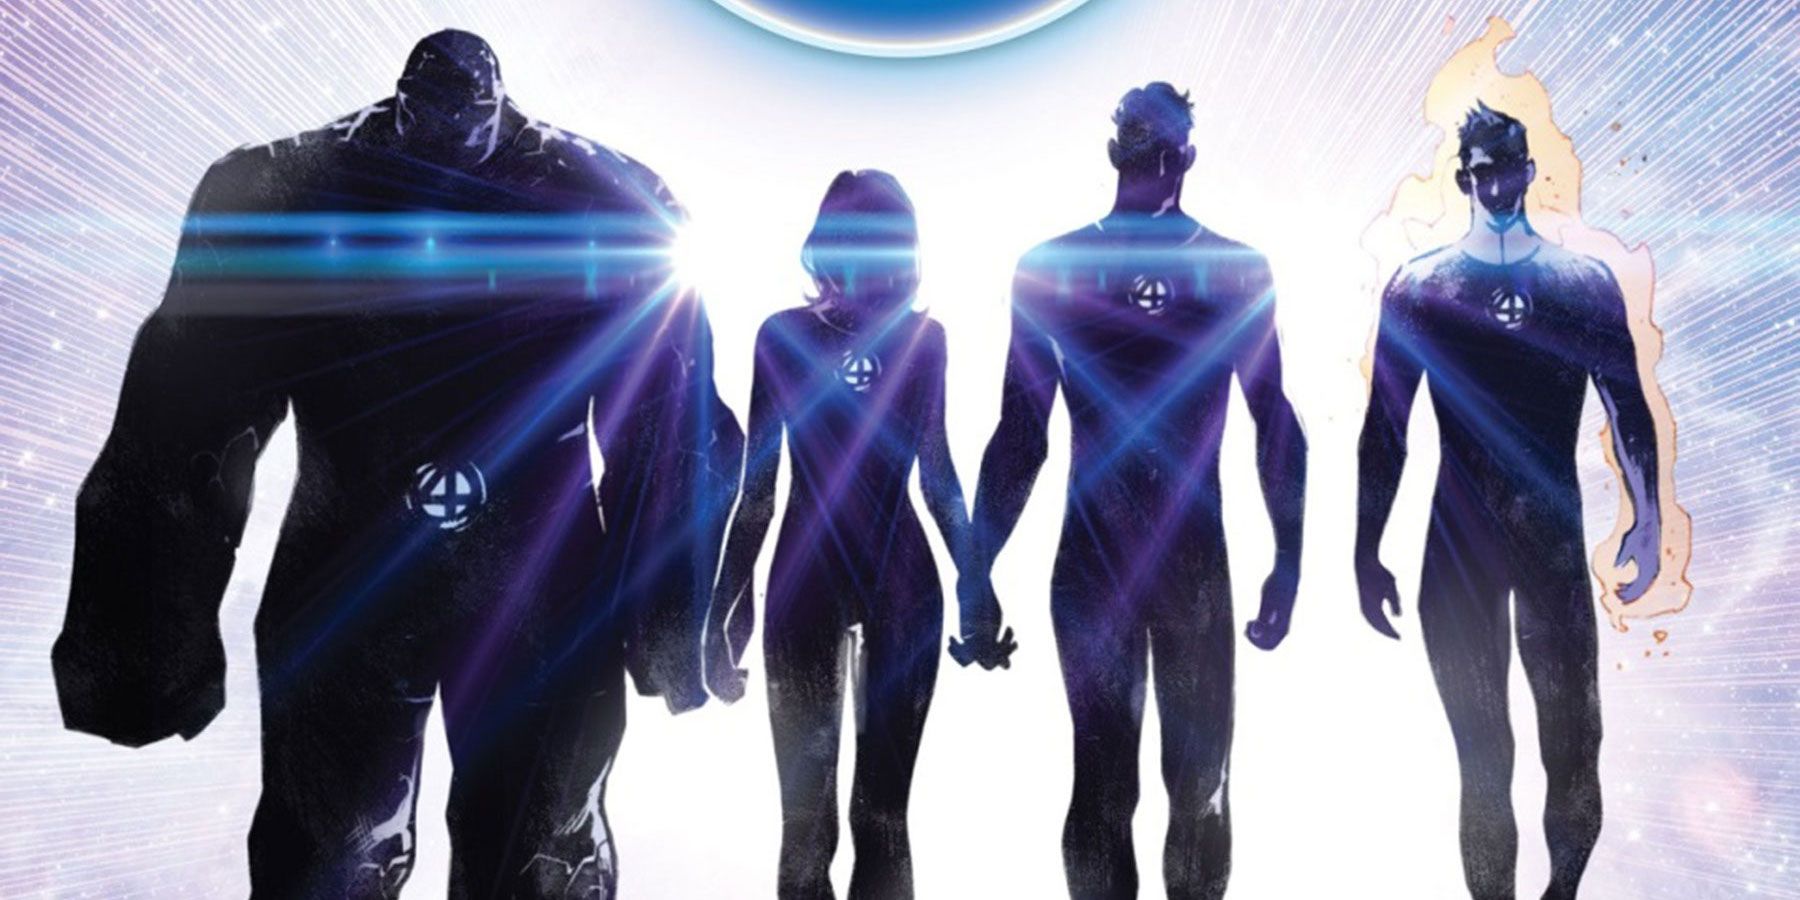 5 Fantastic Four Stories We Want To See In The MCU (& 5 We Dont)